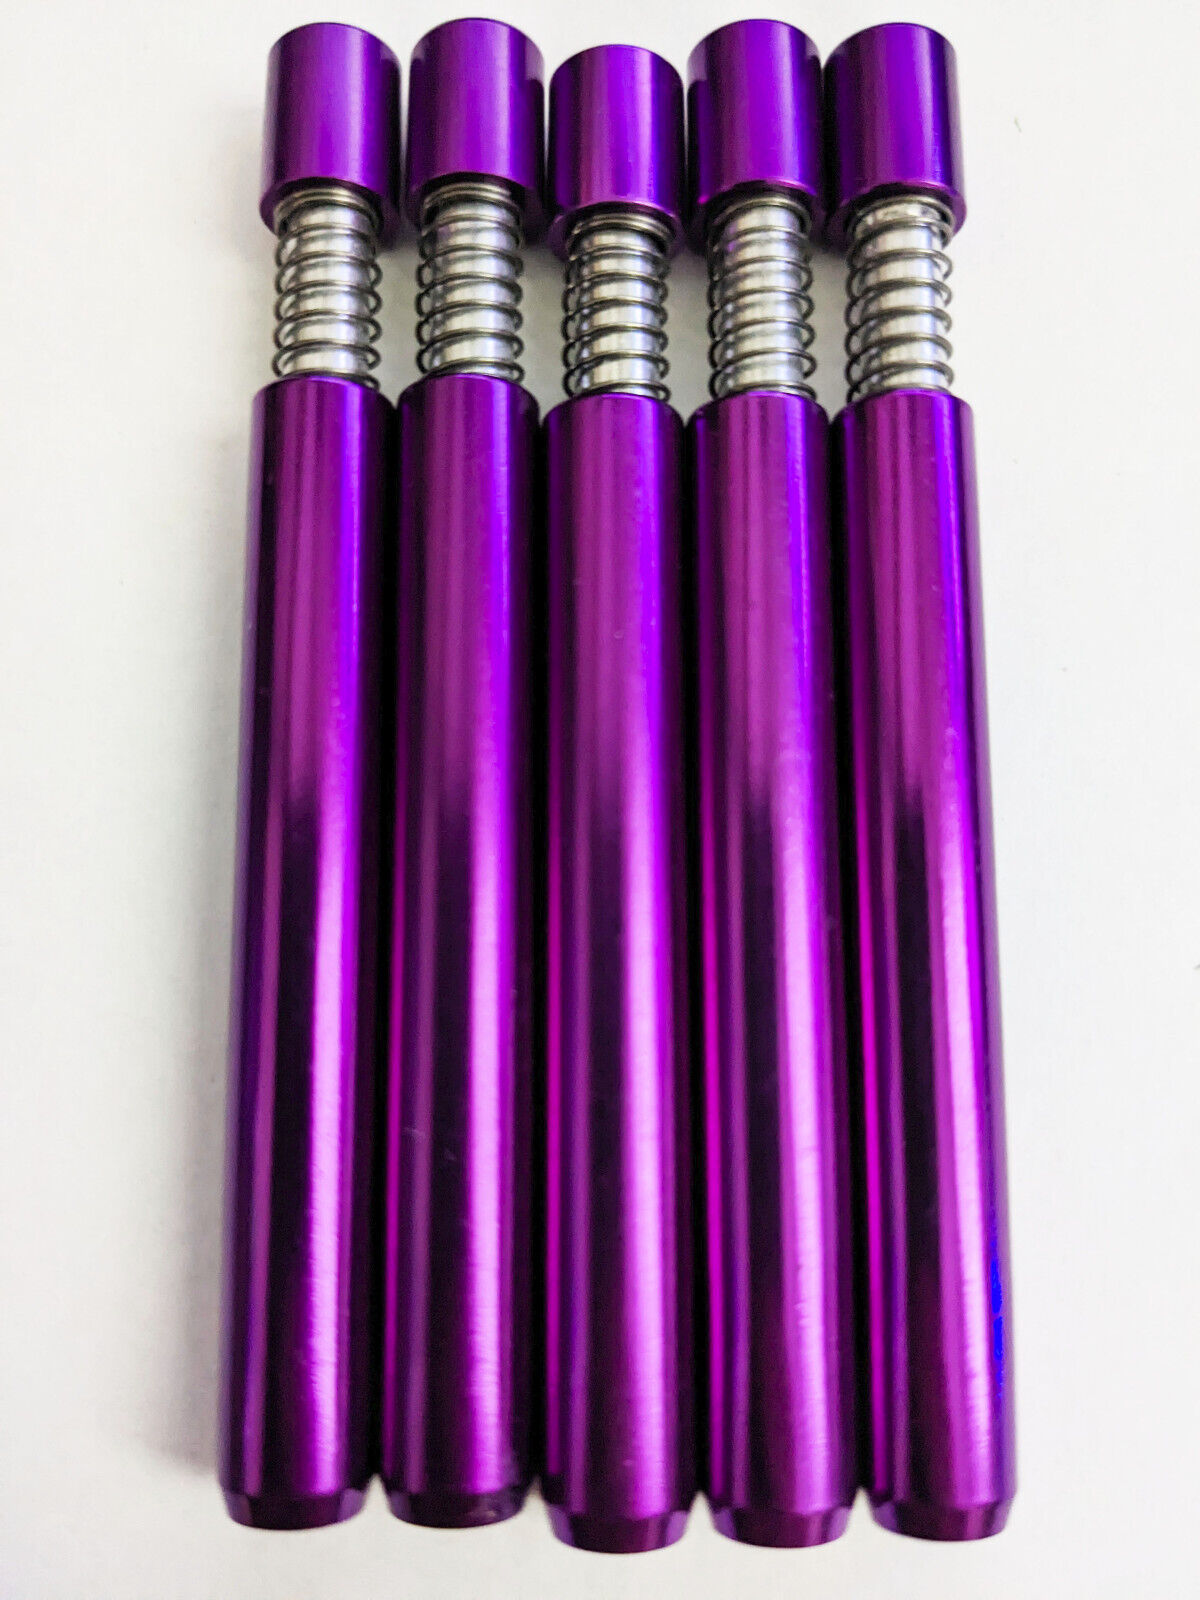 Self Cleaning Metal One Hitter (Pack of 5 Purple) Spring Loaded Dugout